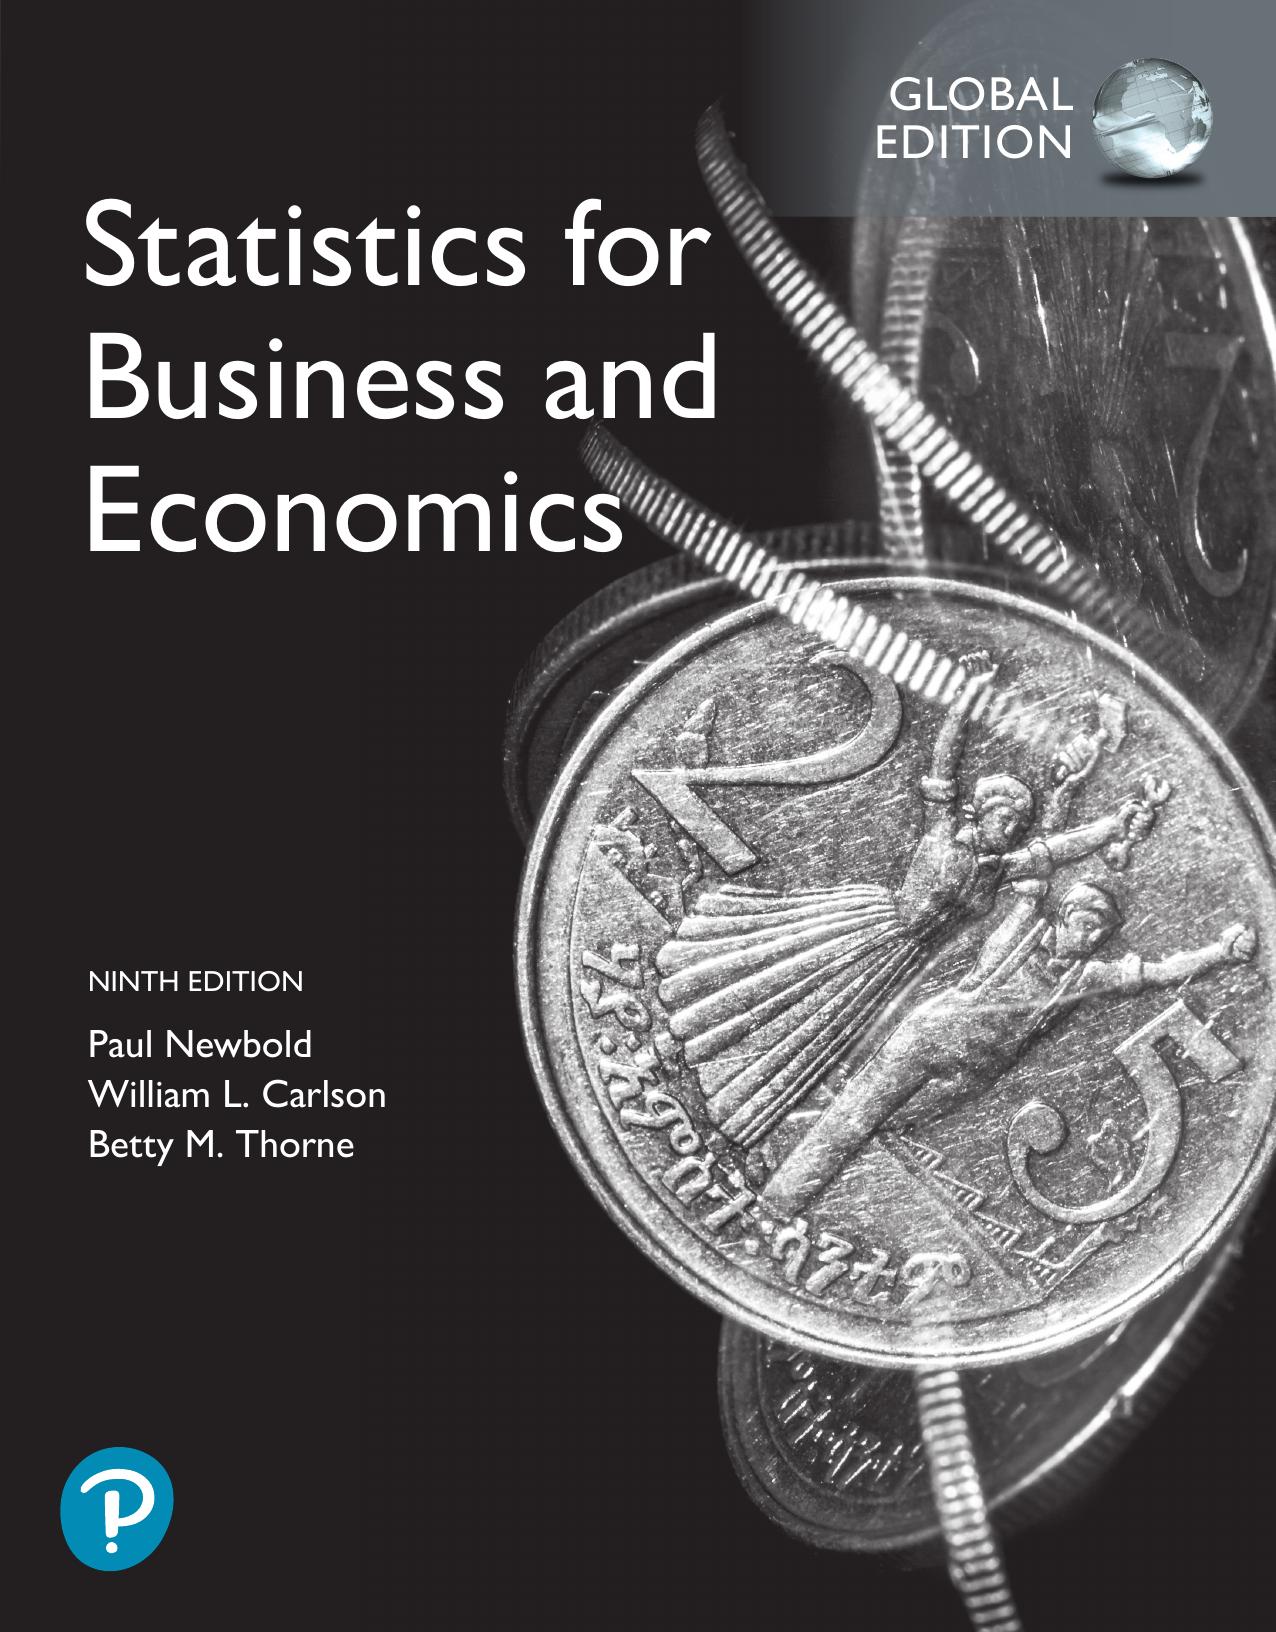 (eBook PDF)Statistics for Business and Economics 9th Global Edition by Paul Newbold,William Carlson,Betty Thorne